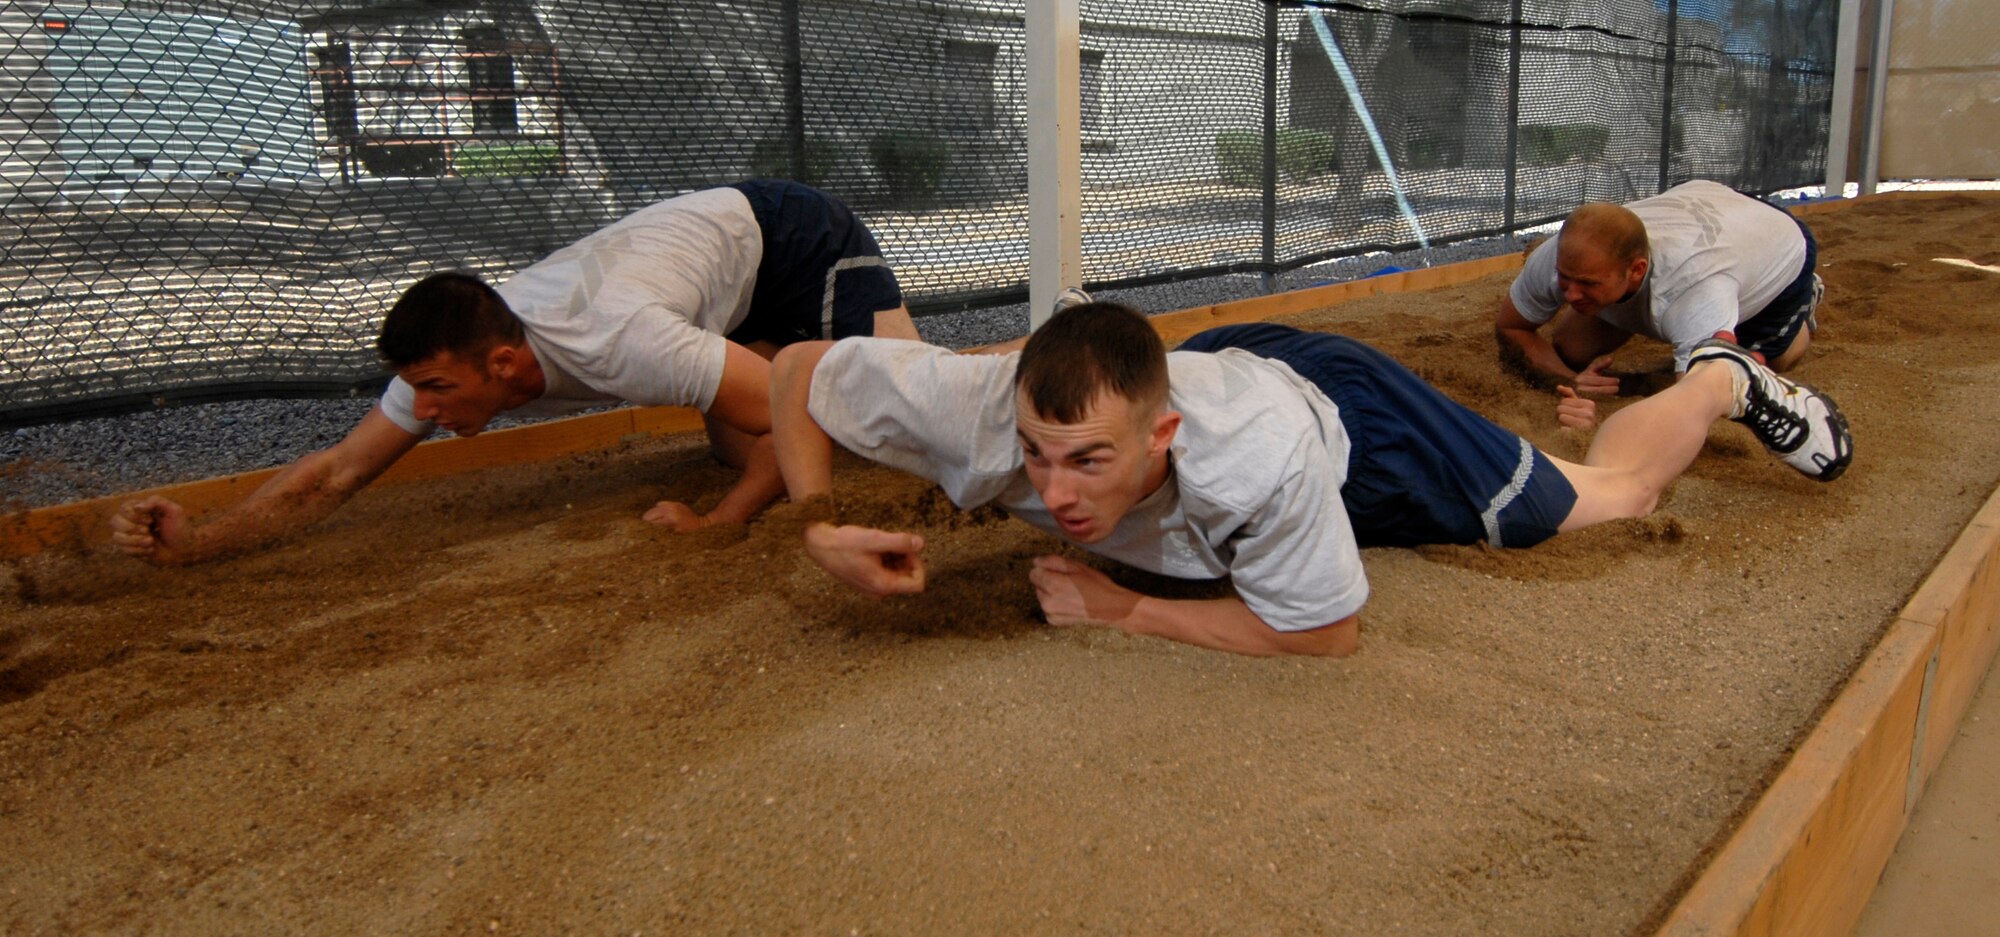 Members of the 56th Security Forces Squadron low-crawl in the newly-minted Combat PT Course on Luke Air Force Base, Ariz.  (U.S. Air Force photo by Tech. Sgt. Jeffrey A. Wolfe)